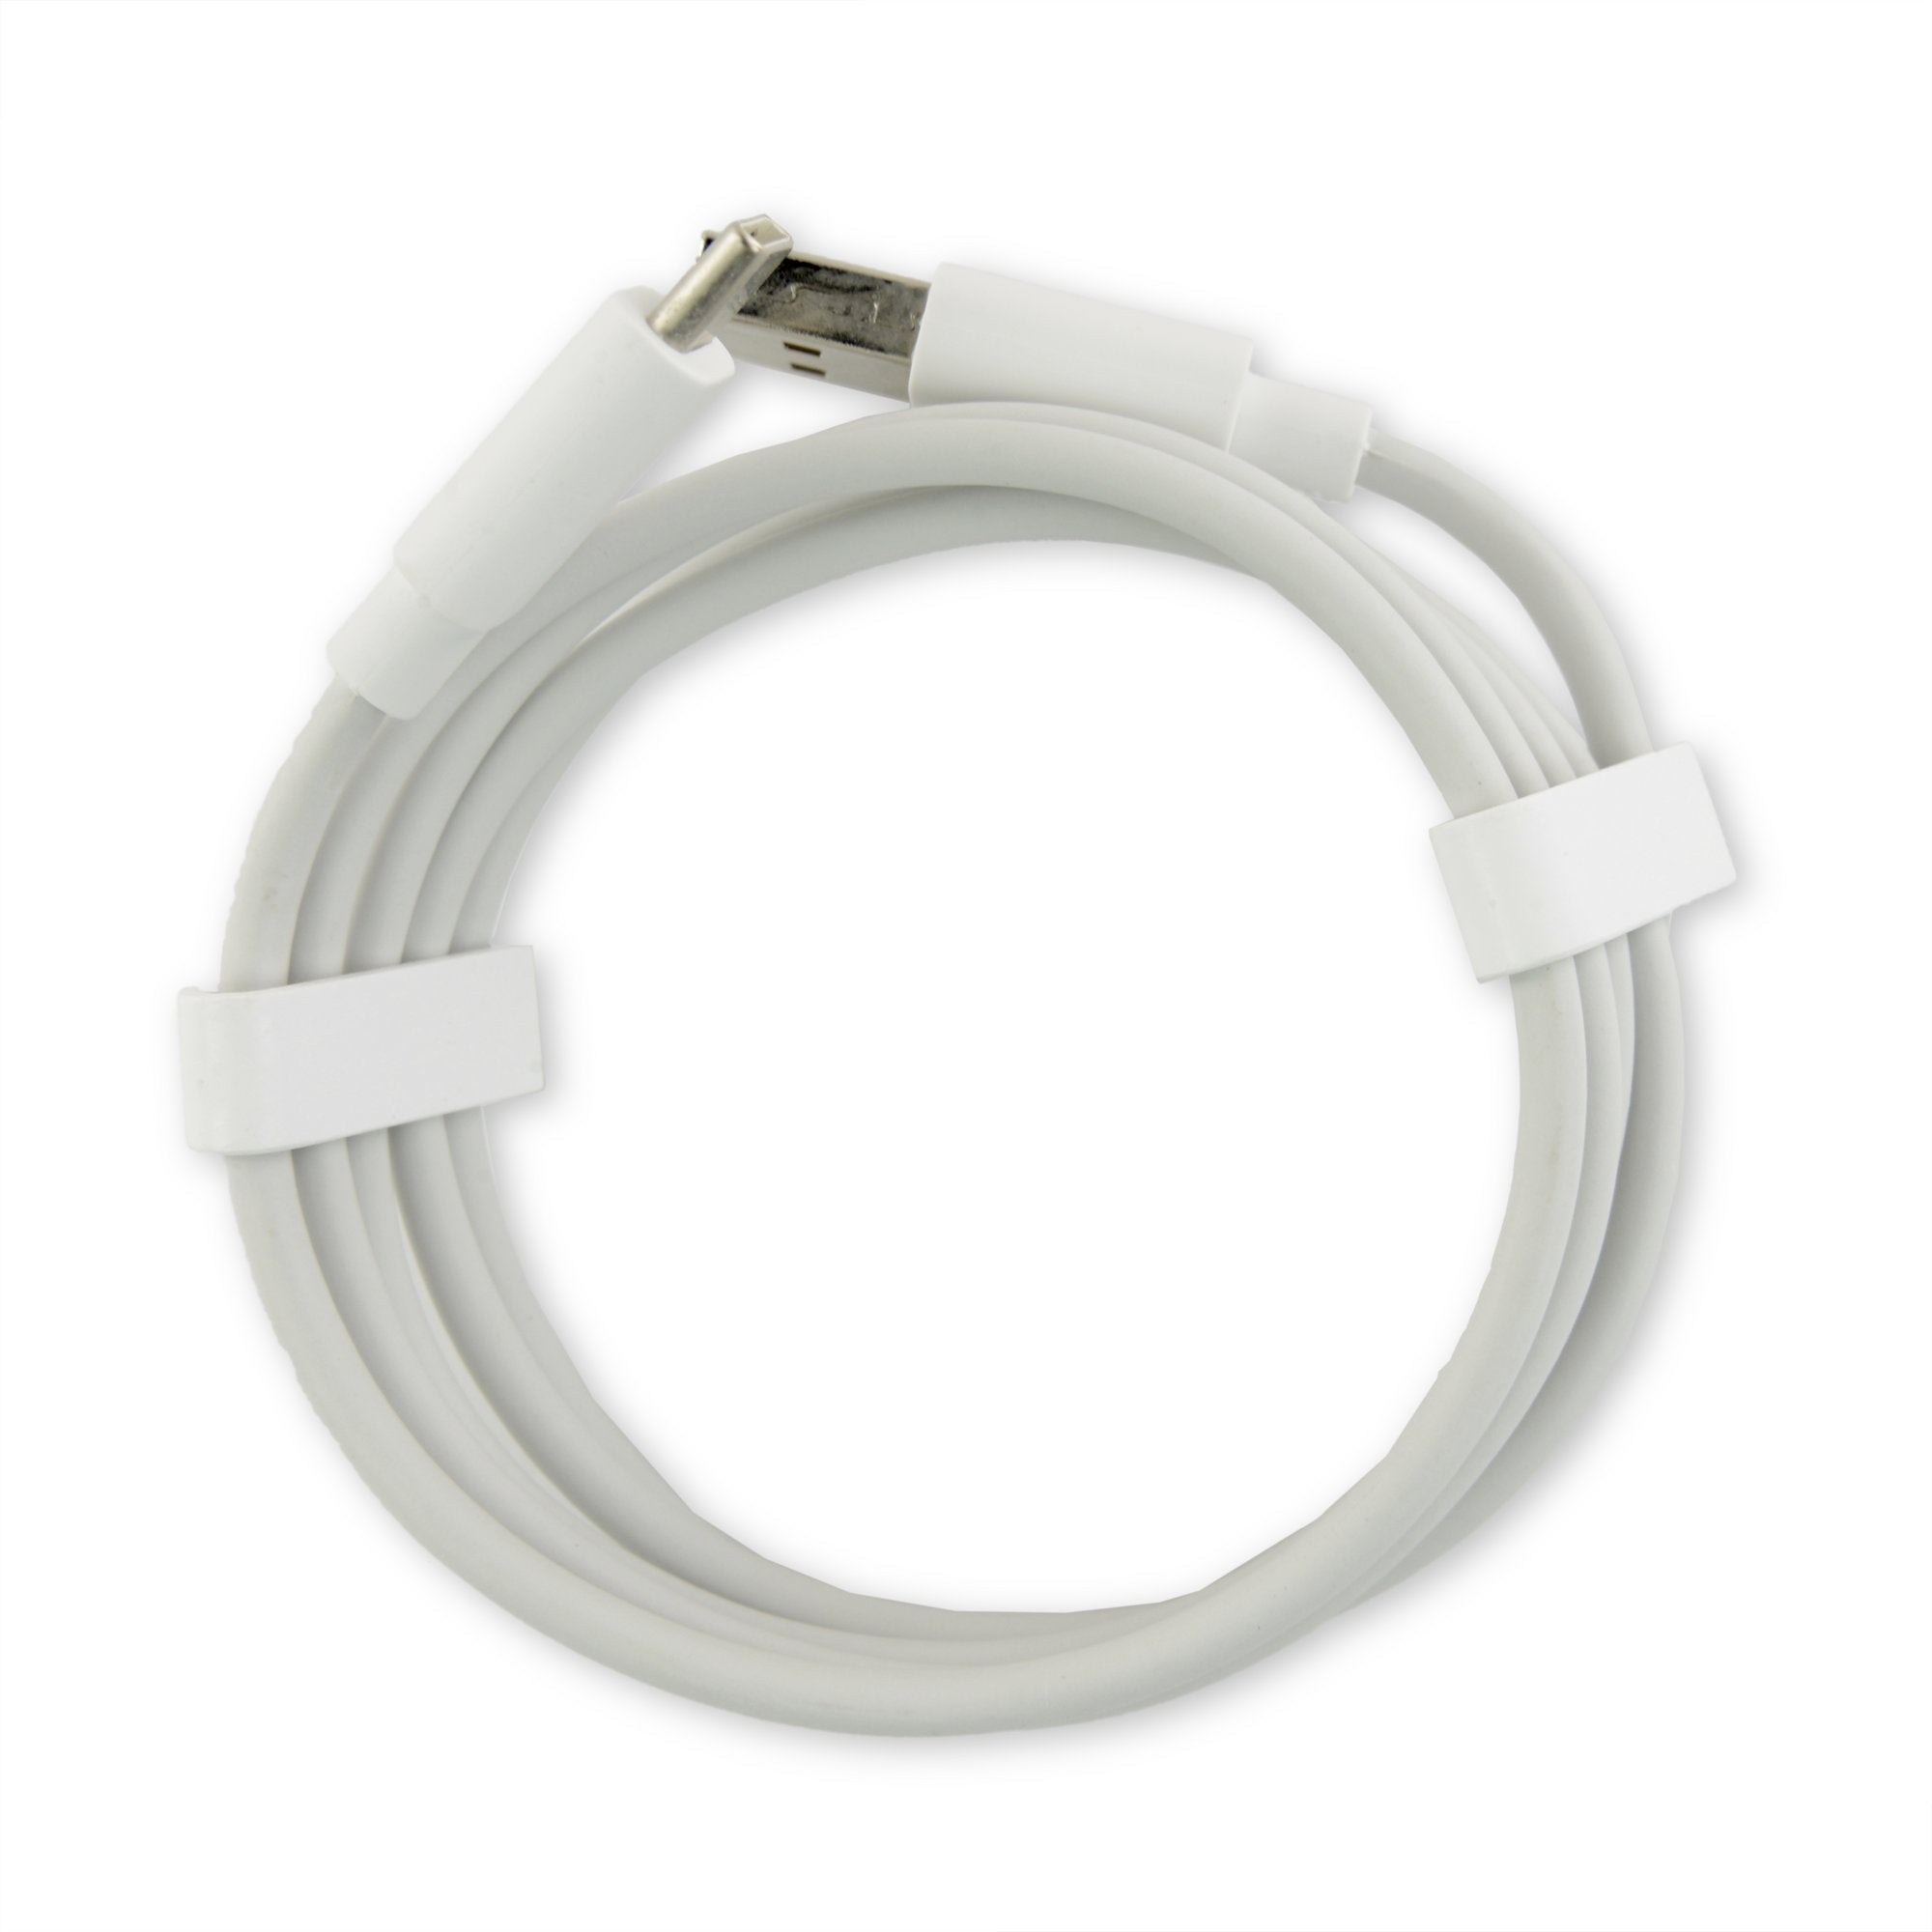 Shot Case Bracelet Lightning Cable for Apple iPad Pro Chrome Charger USB  Connector 25 cm White: Buy Online at Best Price in UAE - Amazon.ae